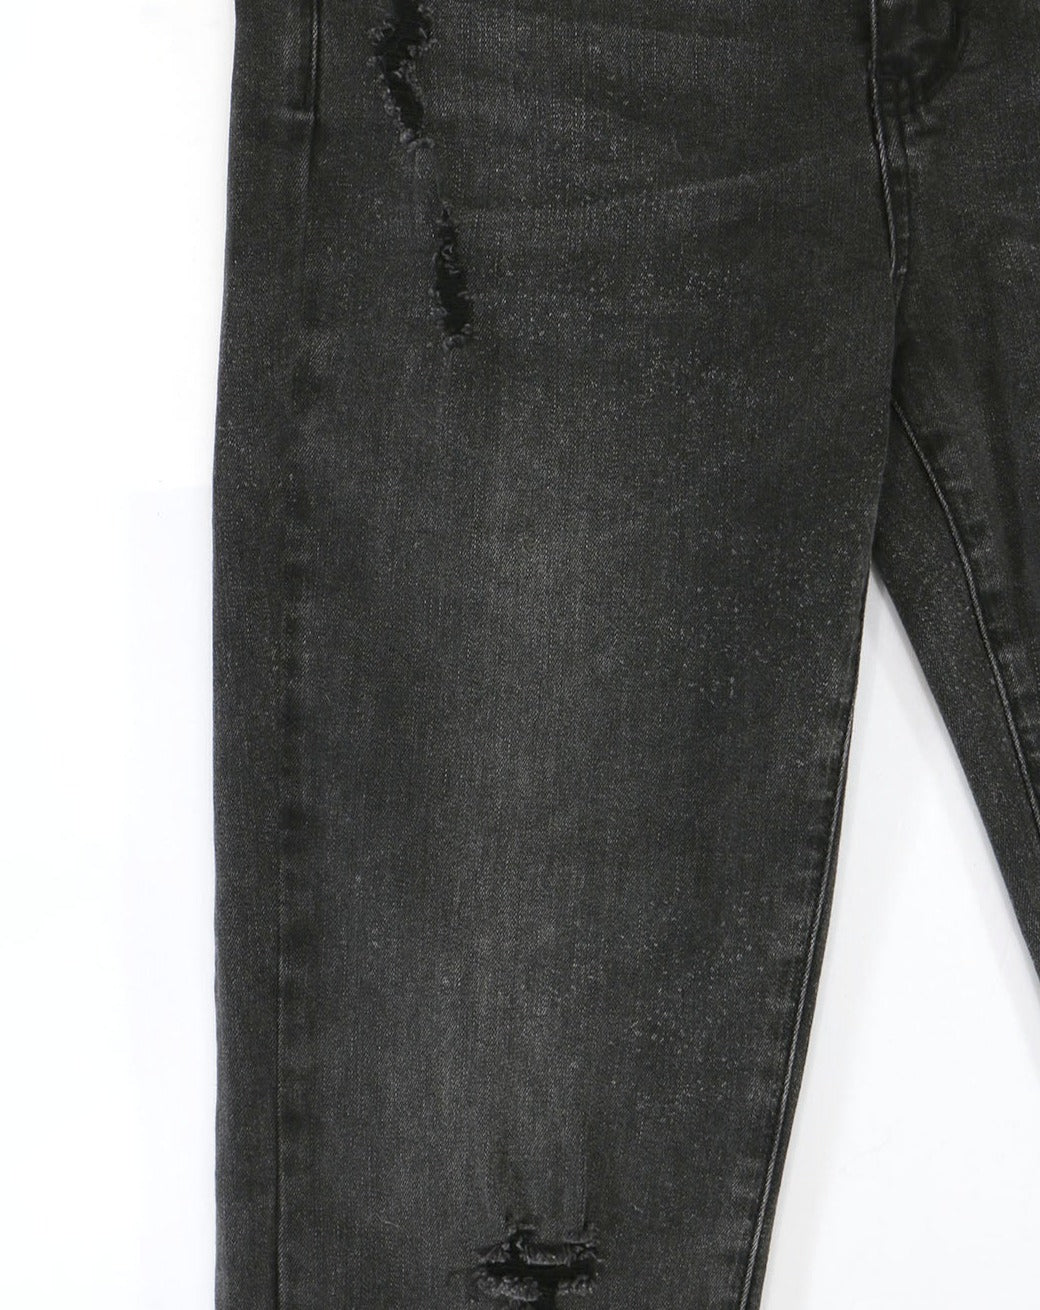 Dark Wash Straight Leg Jeggings Featuring Pockets. (6 Pack